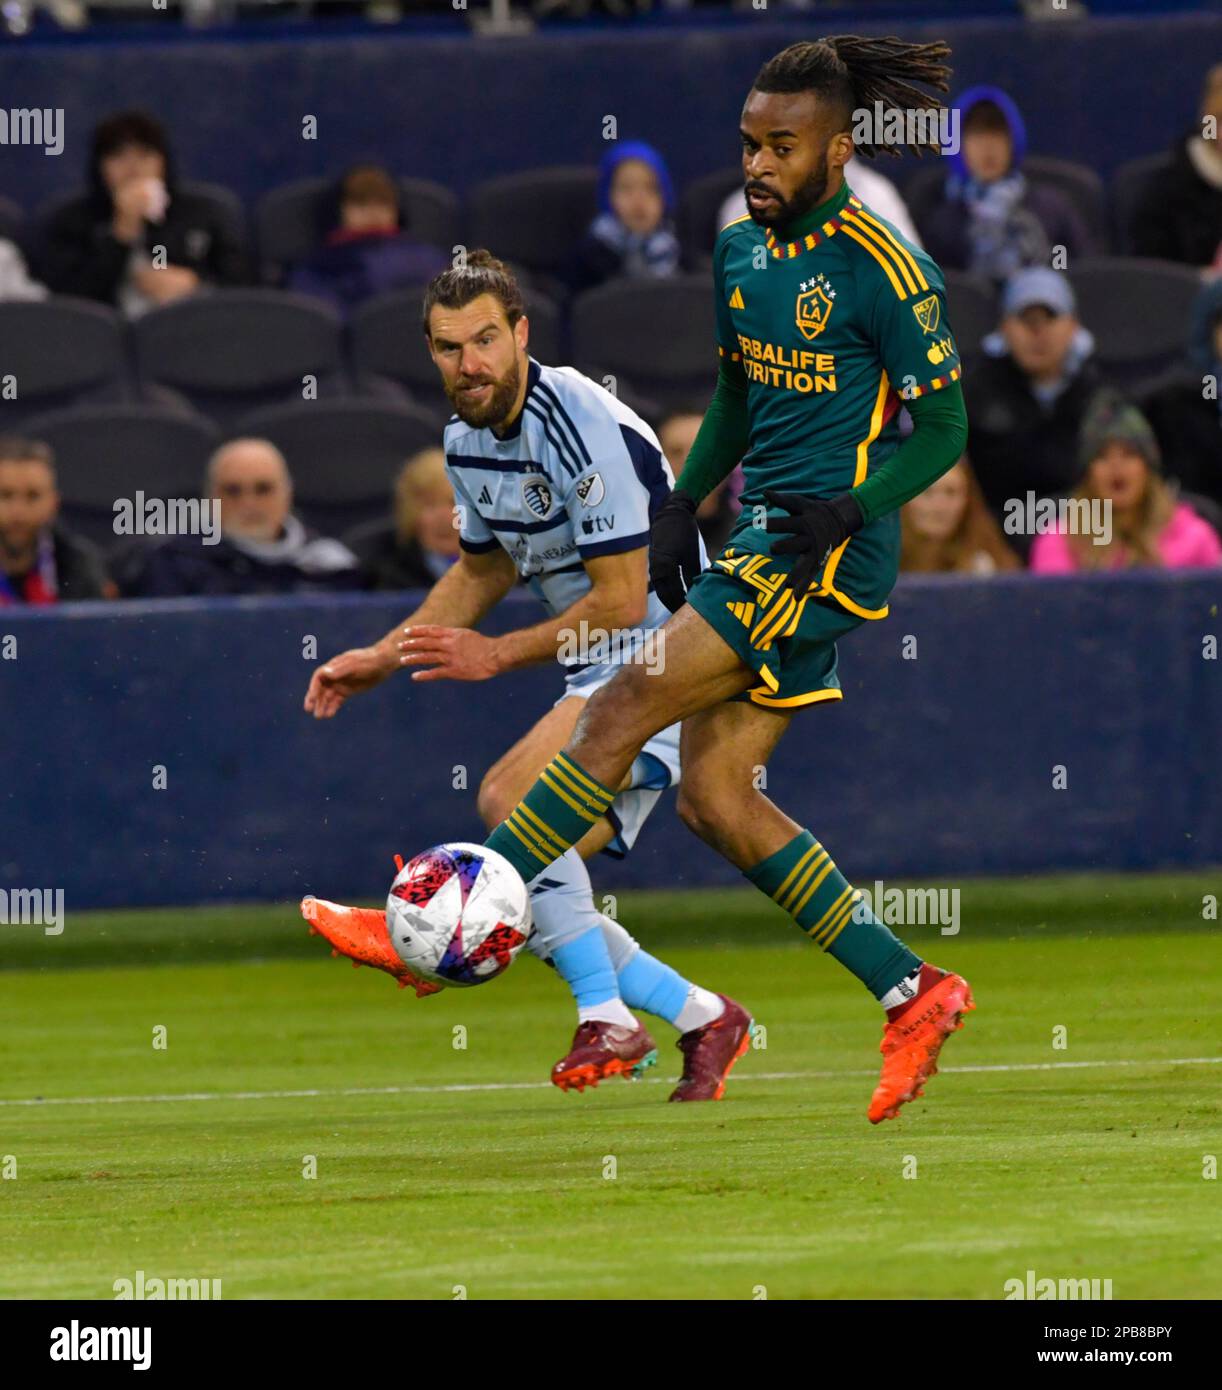 Kansas City, USA. 16th Nov, 2022. Los Angeles Galaxy defender Jalen Neal (24, front) moves the ball as Sporting Kansas City midfielder Graham Zusi (8) follows. Sporting KC hosted the LA Galaxy in a Major League Soccer game on March 11, 2023 at Children's Mercy Park Stadium in Kansas City, KS, USA. Photo by Tim Vizer/Sipa USA Credit: Sipa USA/Alamy Live News Stock Photo